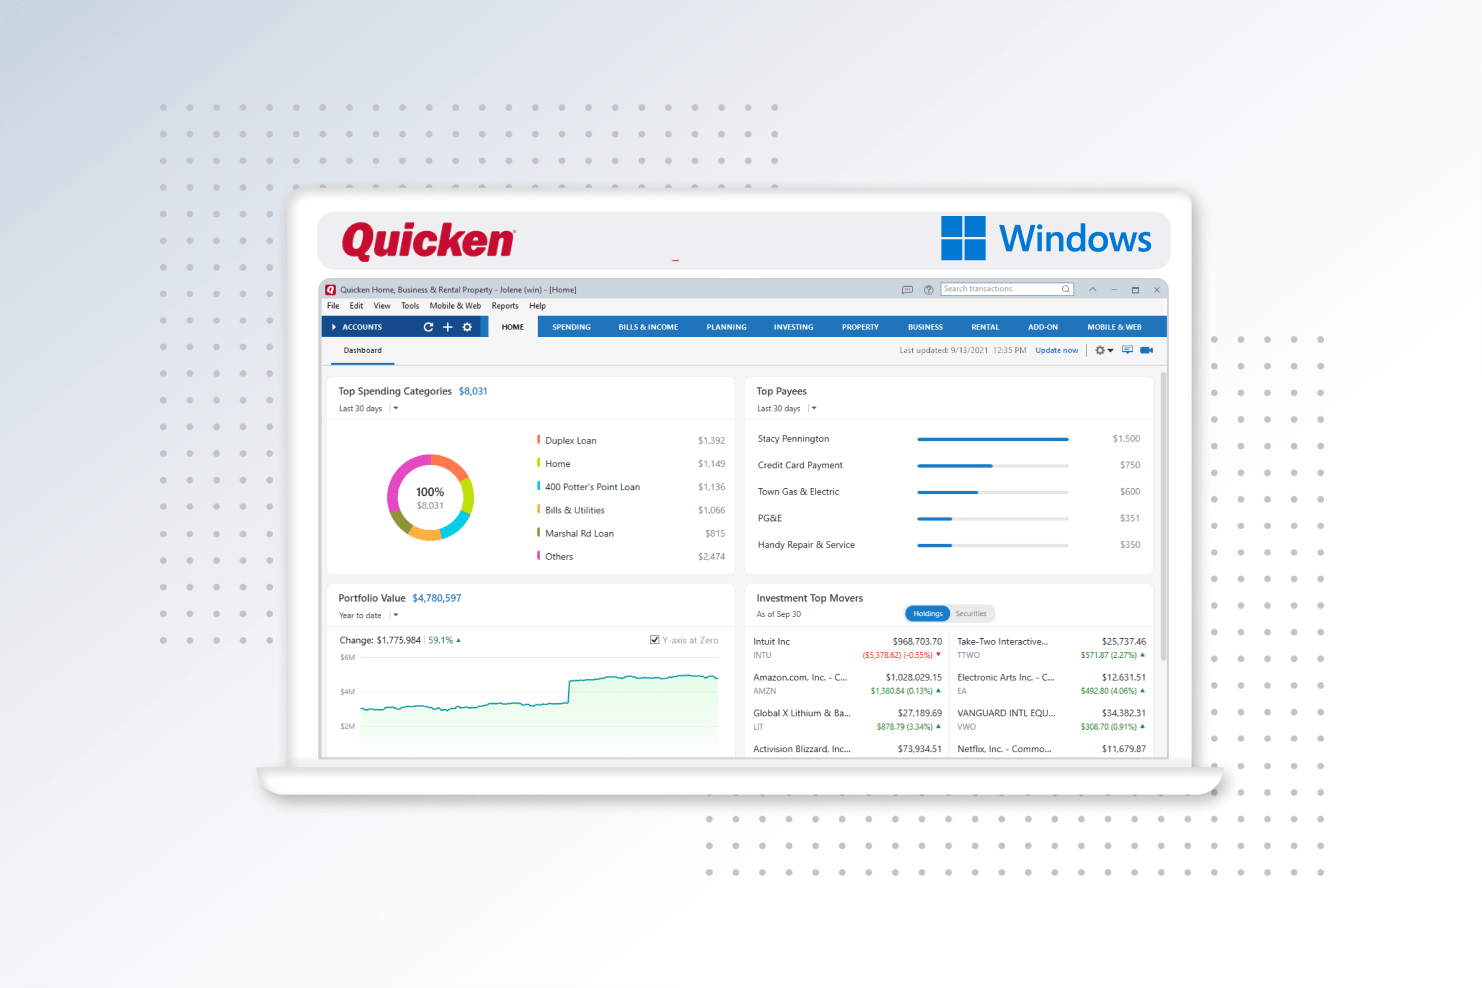 Right-click on the Quicken 2015 icon
Select Properties